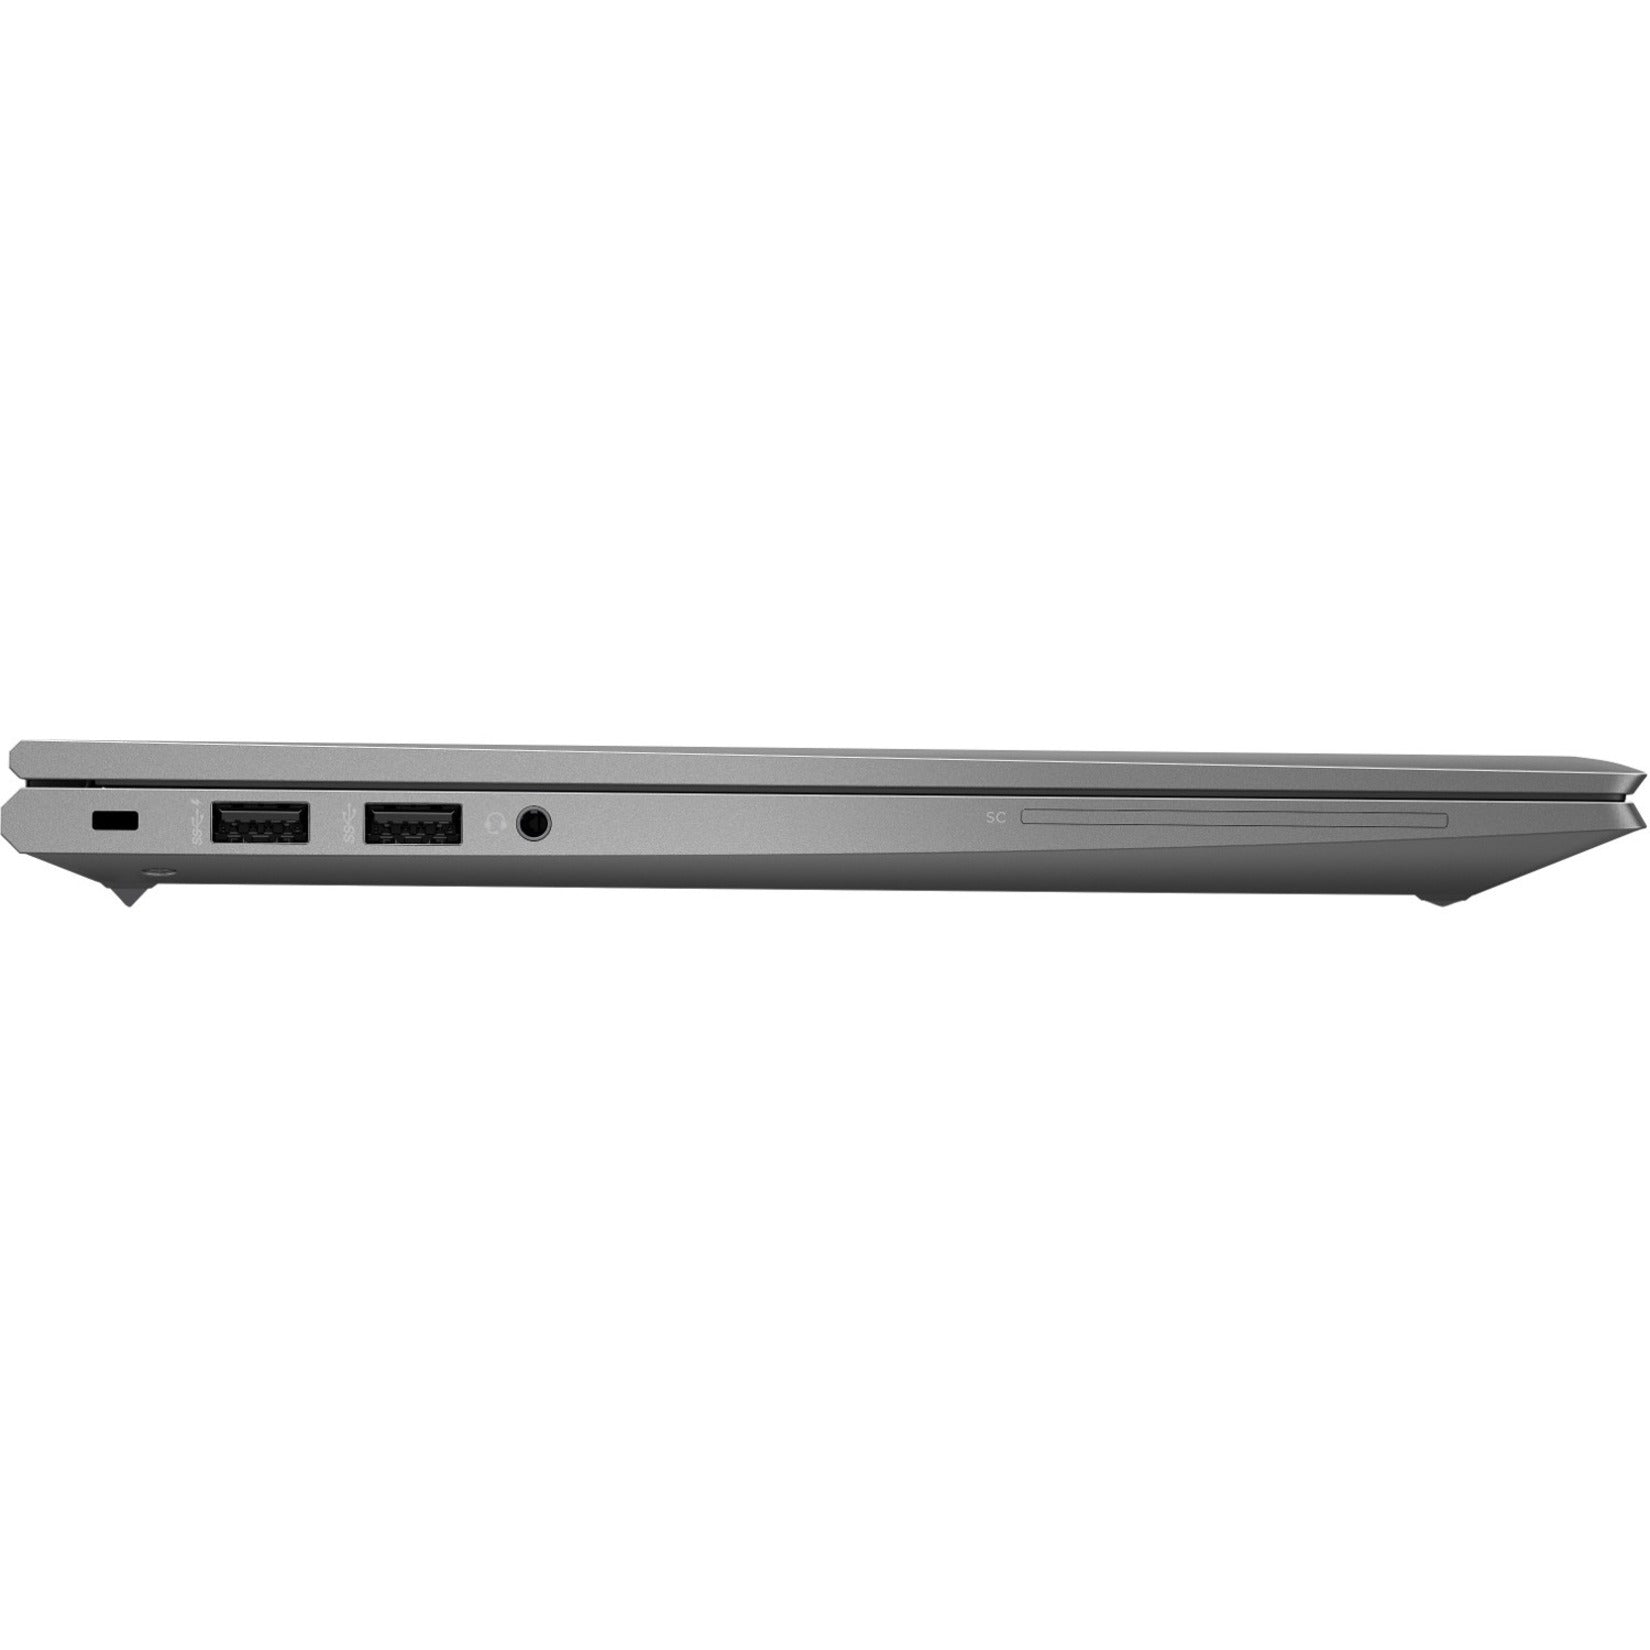 HPI SOURCING - NEW ZBook Firefly 14 G8 Mobile Workstation, Full HD, Intel Core i7 11th Gen, 16GB RAM, 512GB SSD